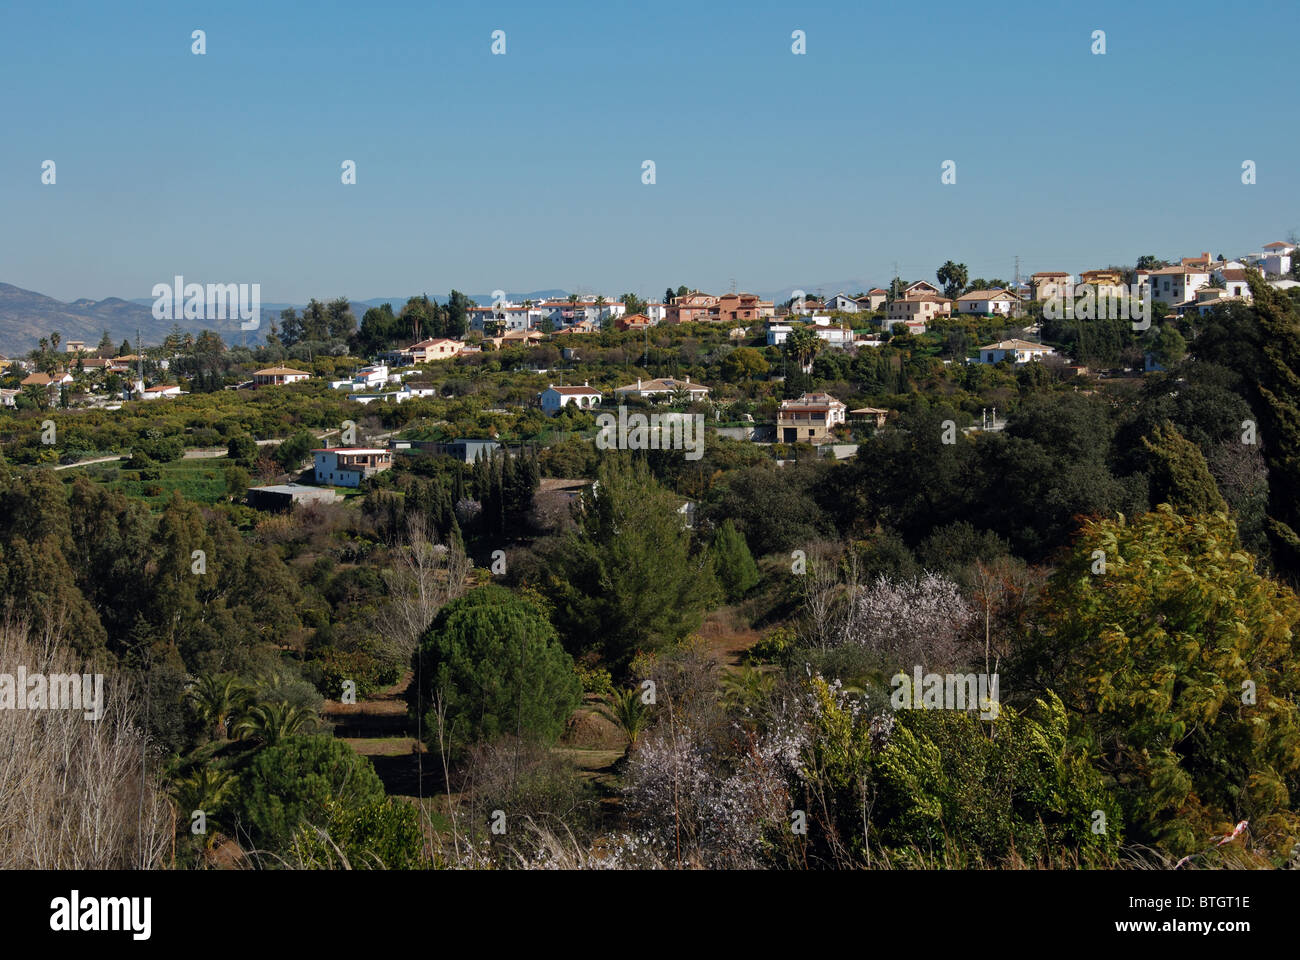 Country houses dotted on the hillsides, Near Alhaurin el Grande, Costa del Sol, Malaga Province, Andalucia, Spain, Europe. Stock Photo